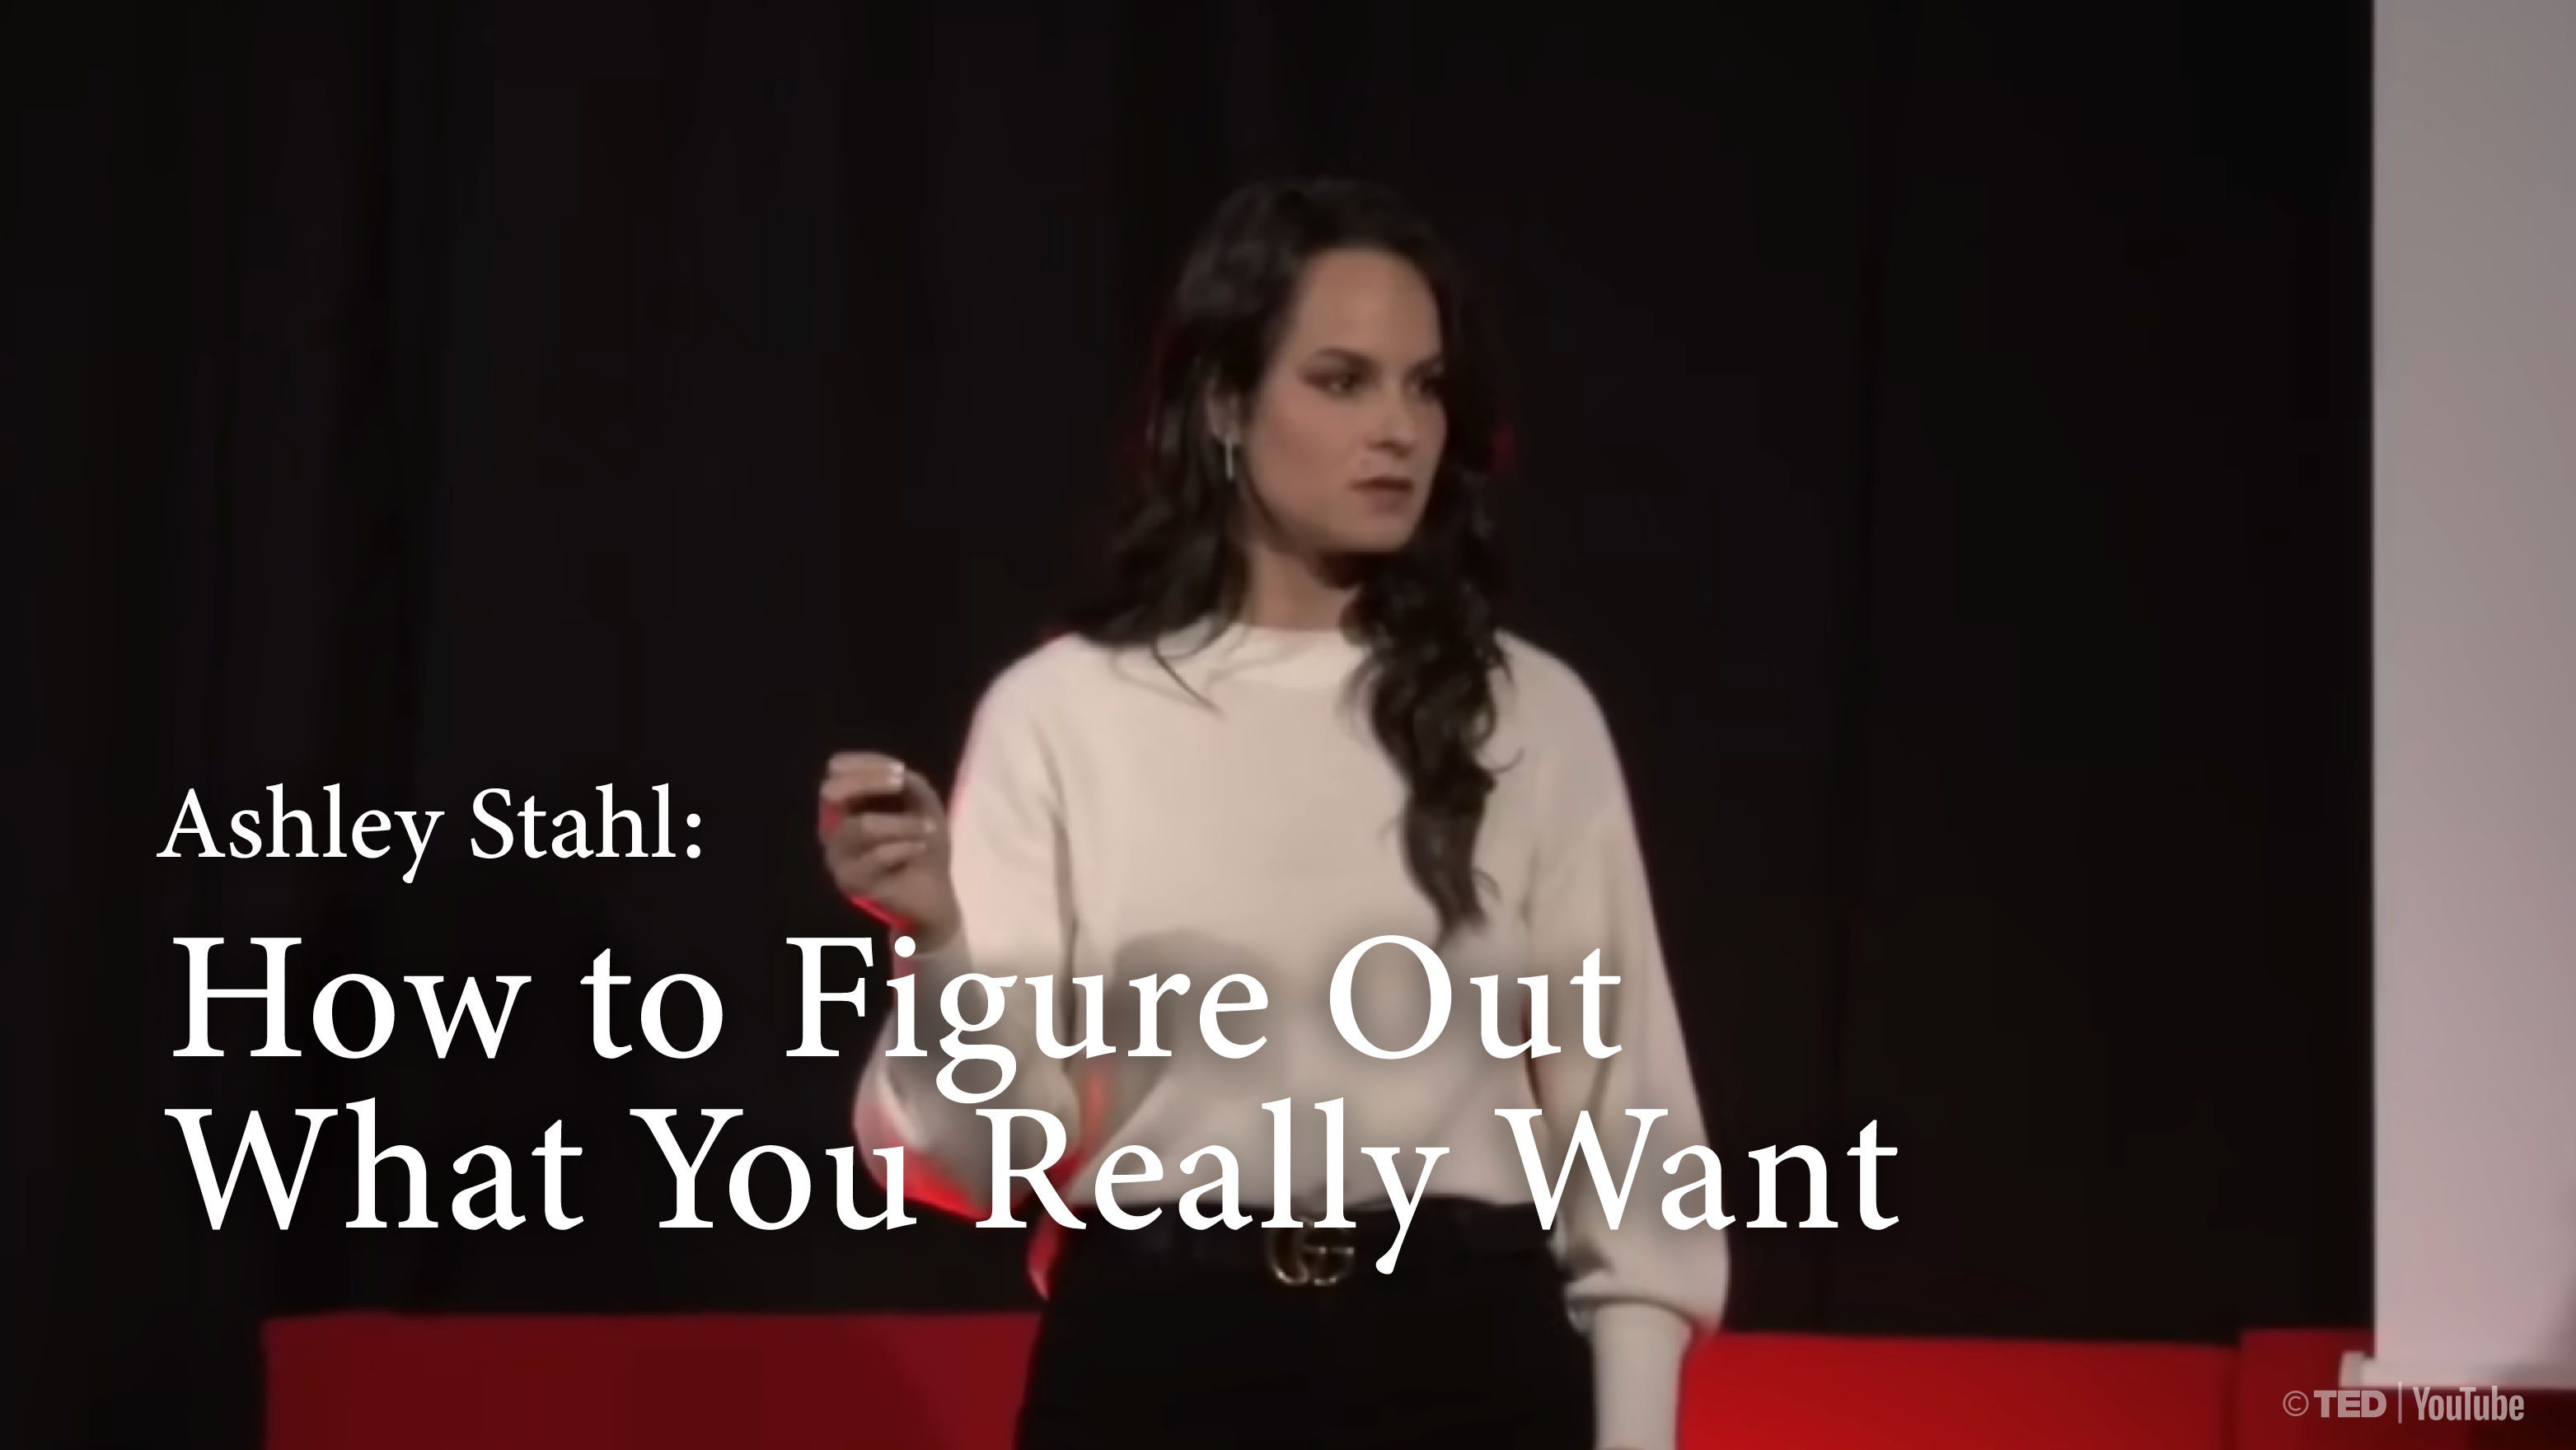 [B] How to Figure Out What You Really Want | Ashley Stahl [FULL]